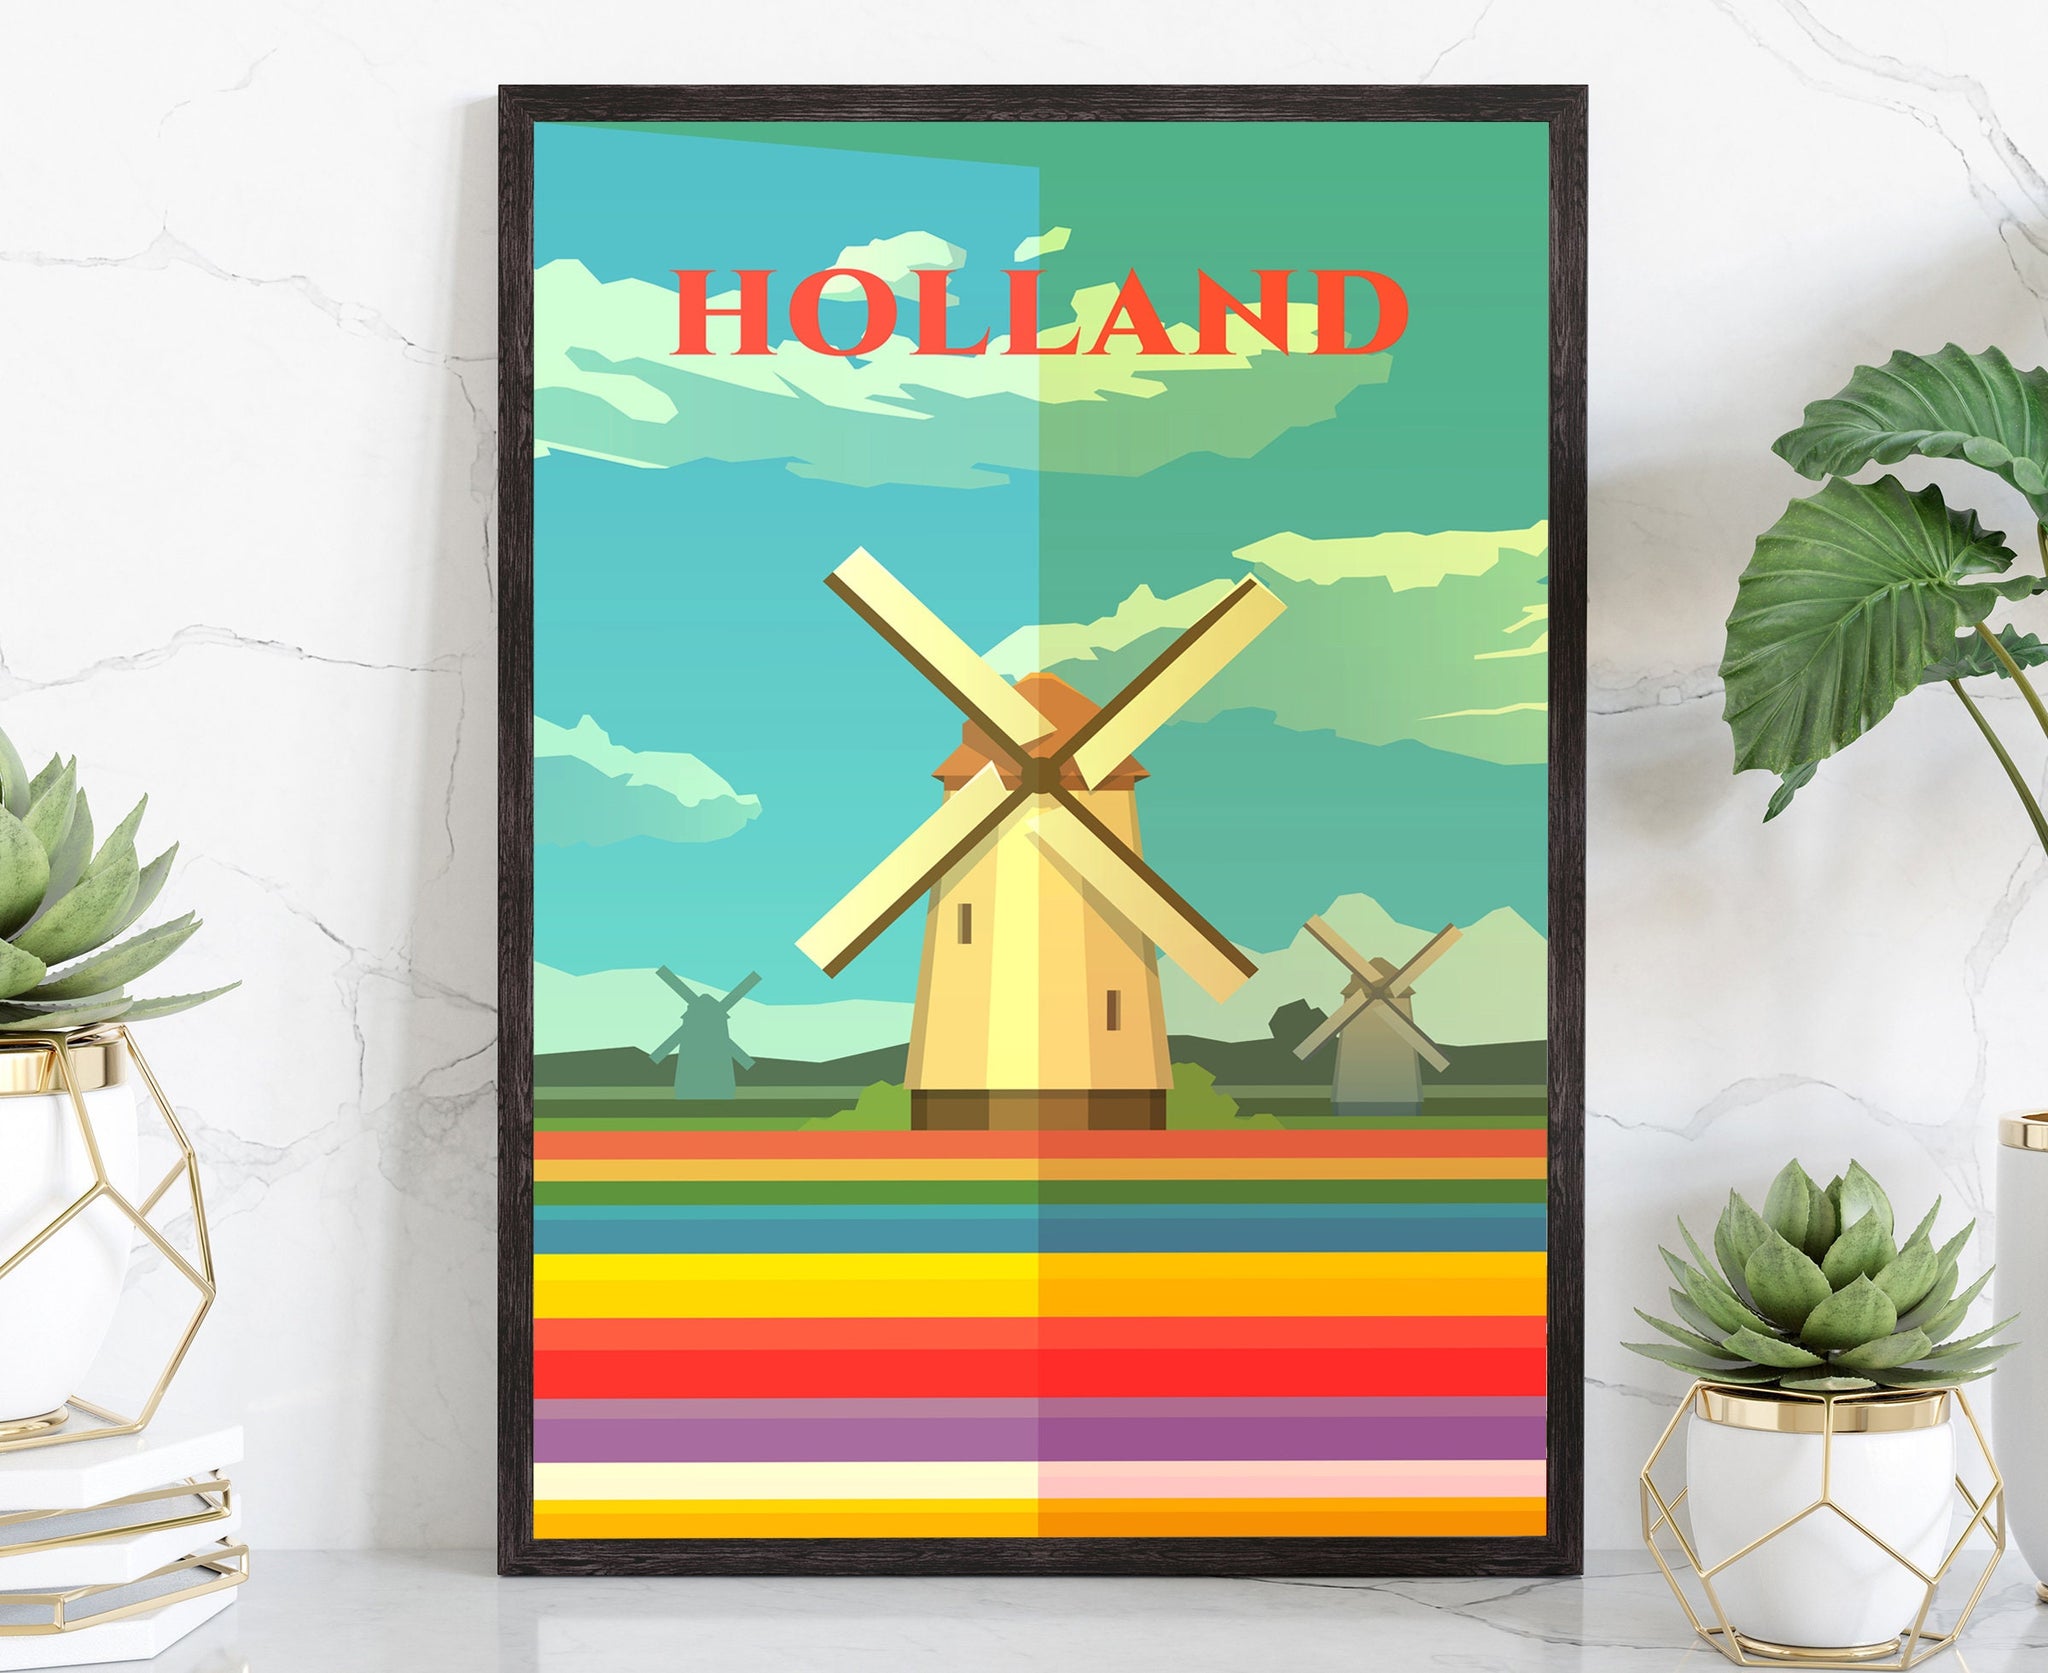 Holland Vintage Rustic Poster Print, Retro Style Travel Poster Print